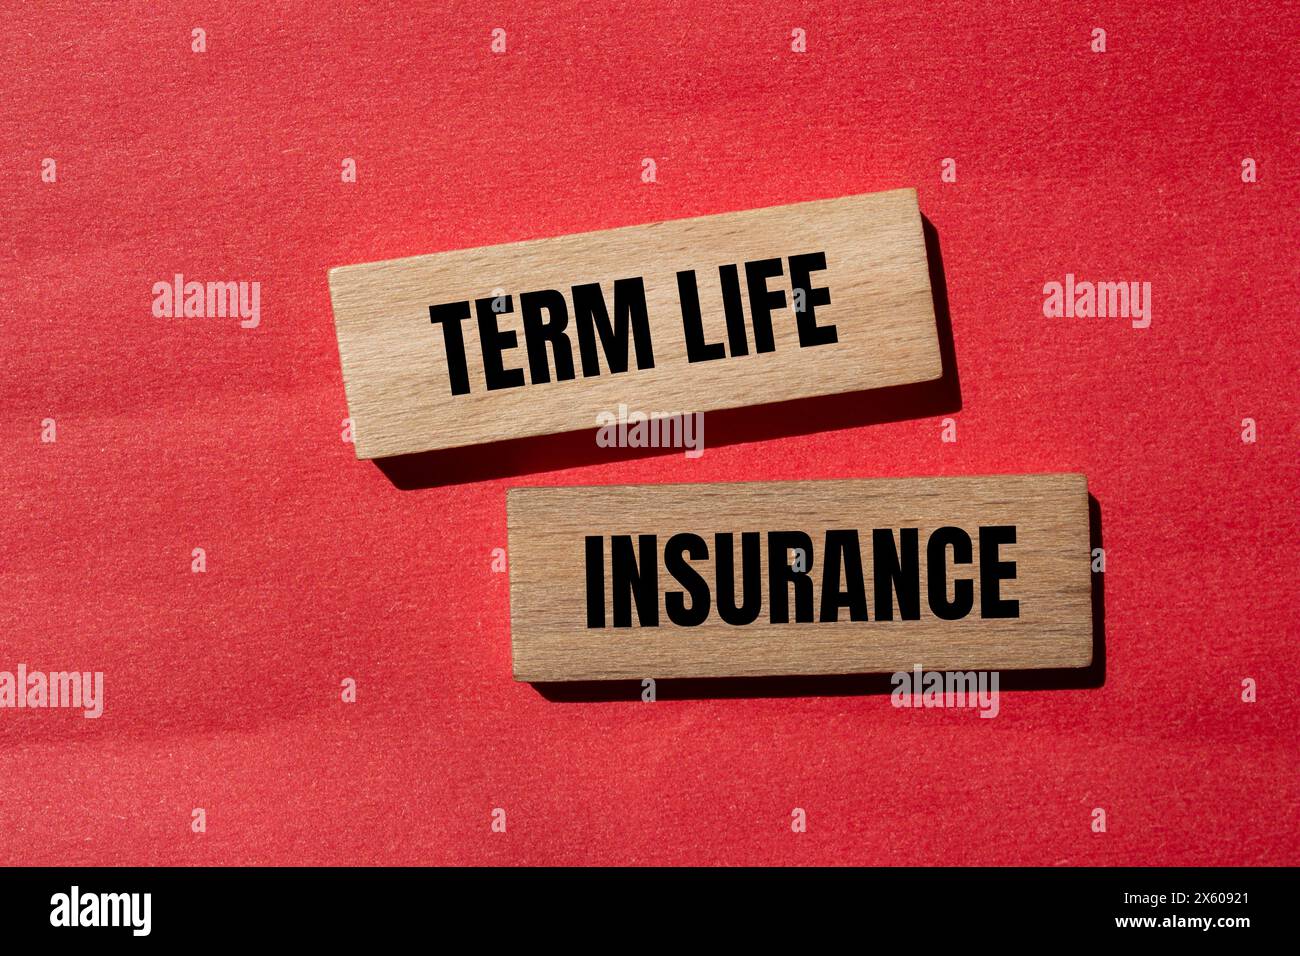 Term life insurance words written on wooden blocks with red background. Conceptual term life insurance symbol. Copy space. Stock Photo